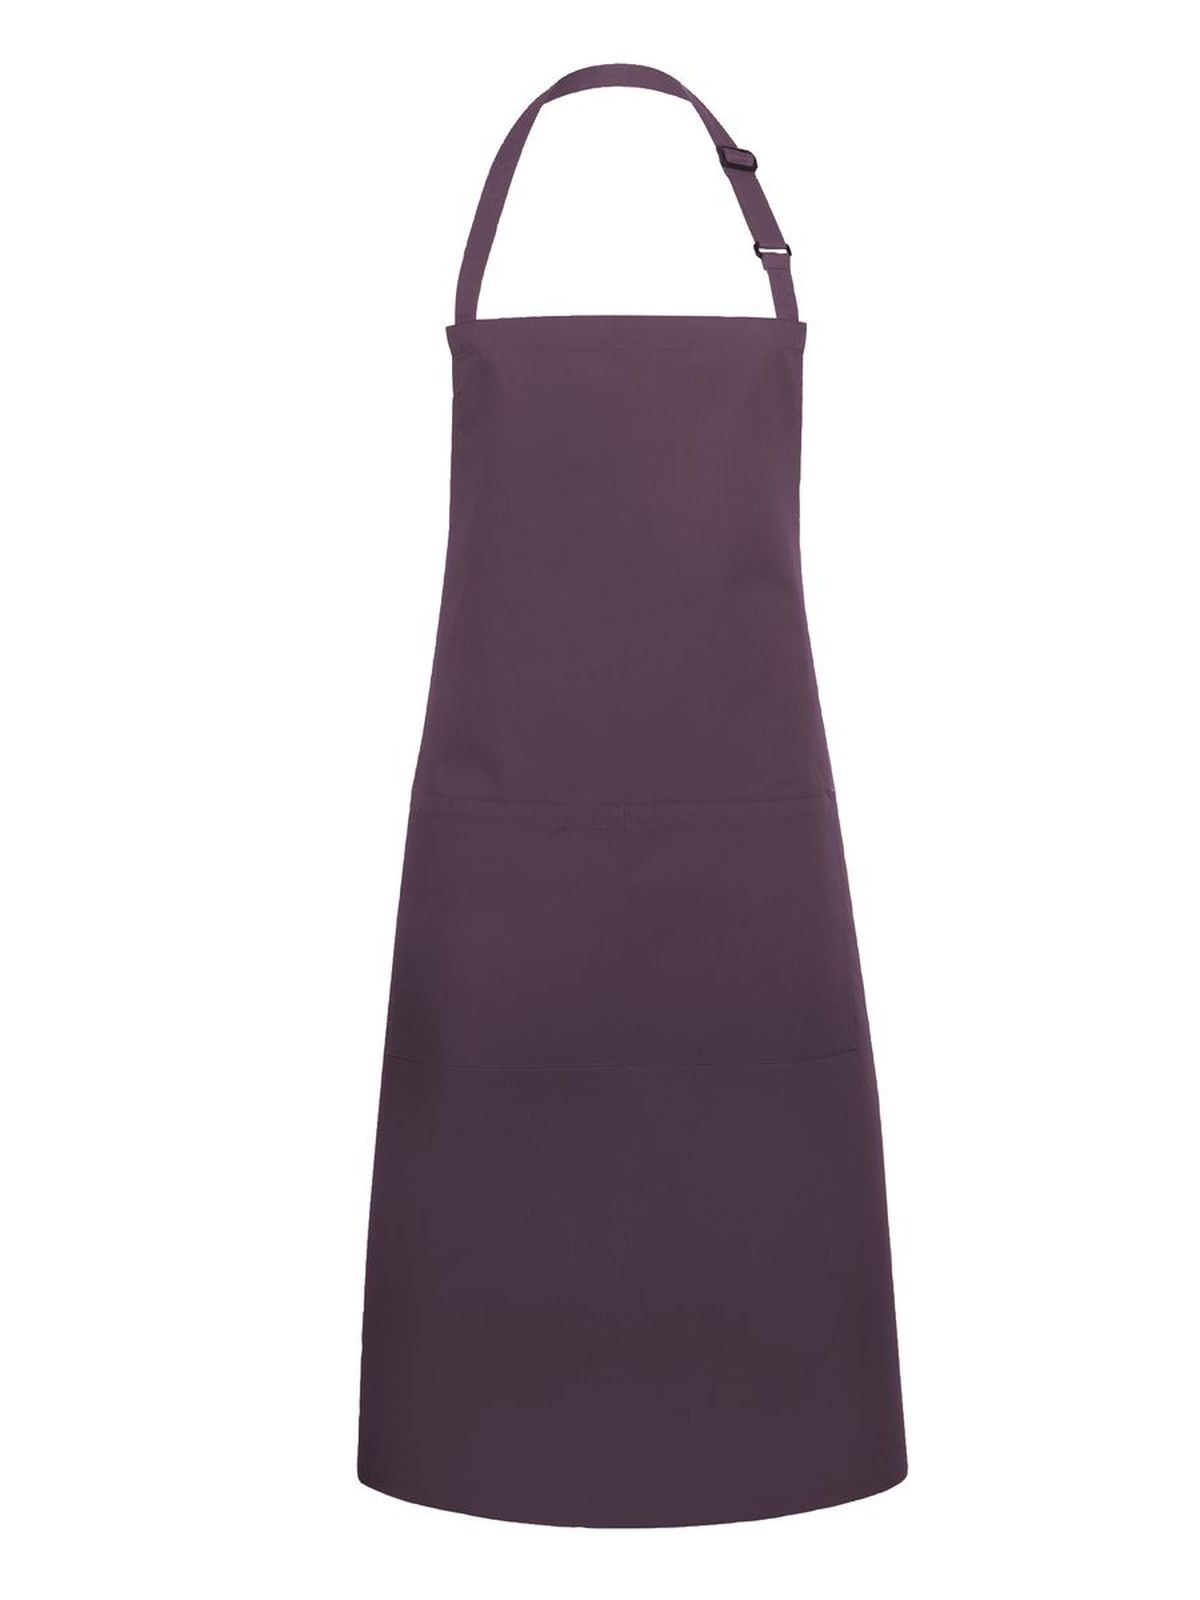 bistro-apron-basic-with-buckle-and-pocket-aubergine.webp